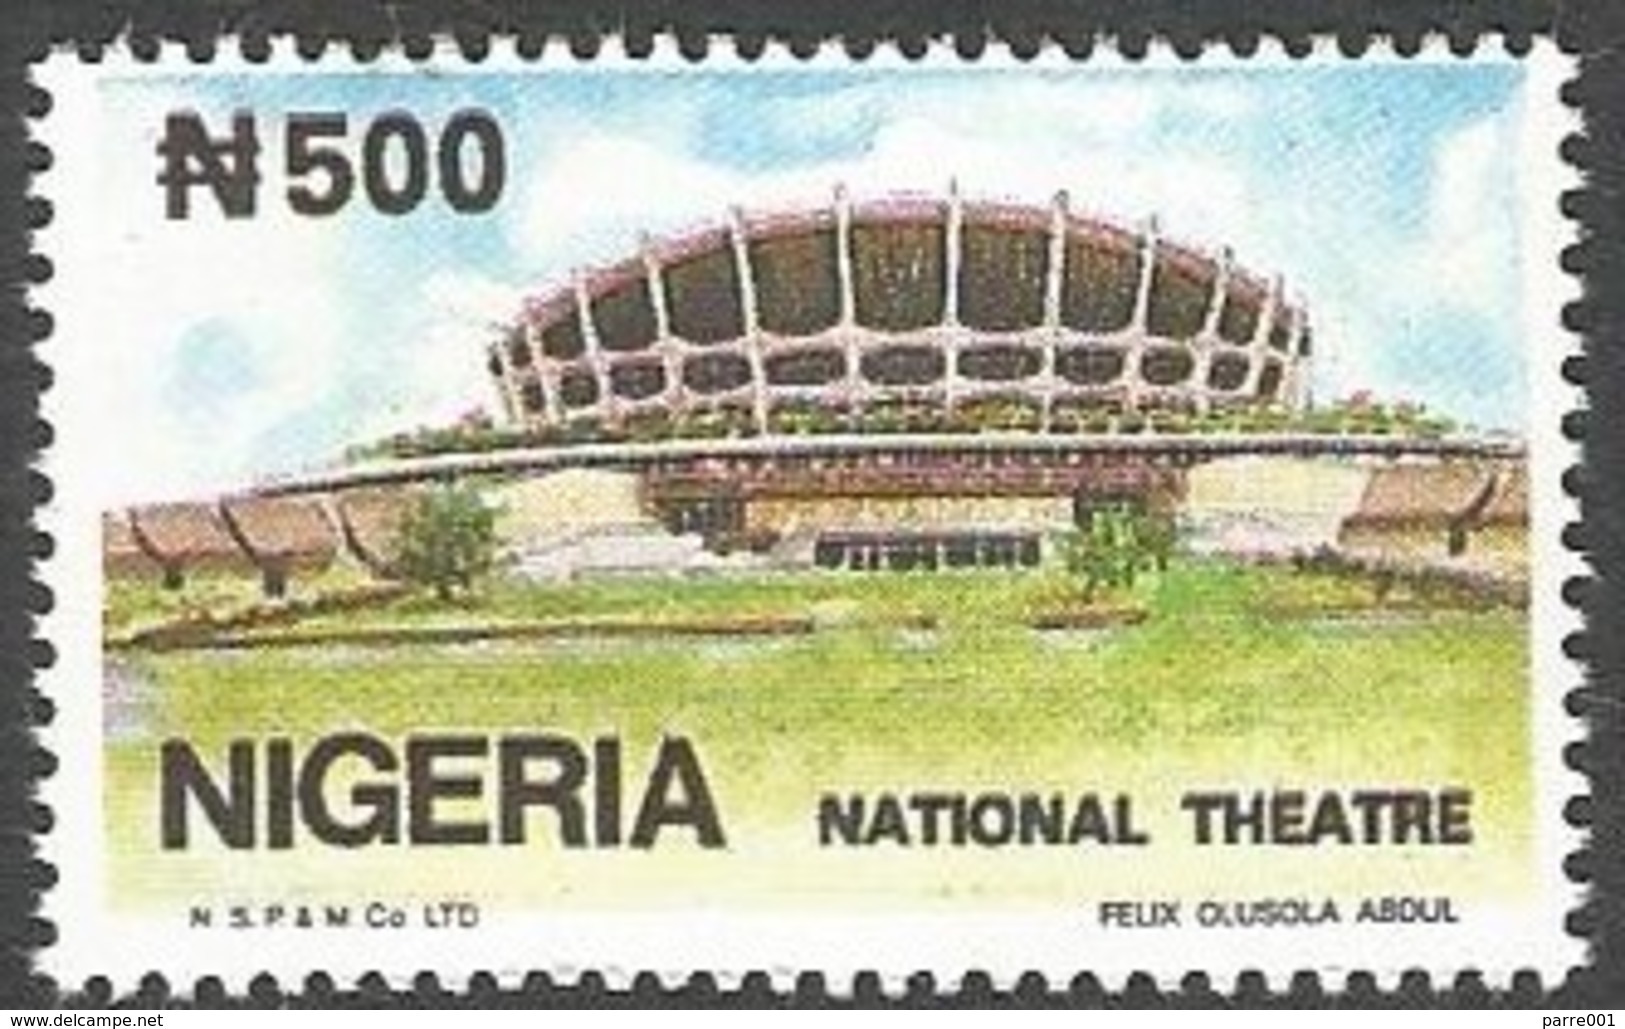 Nigeria 1990 National Theater N500 Michel D546 A Perforation 14.5 Unreported Mint Rare Stamp - Nigeria (1961-...)